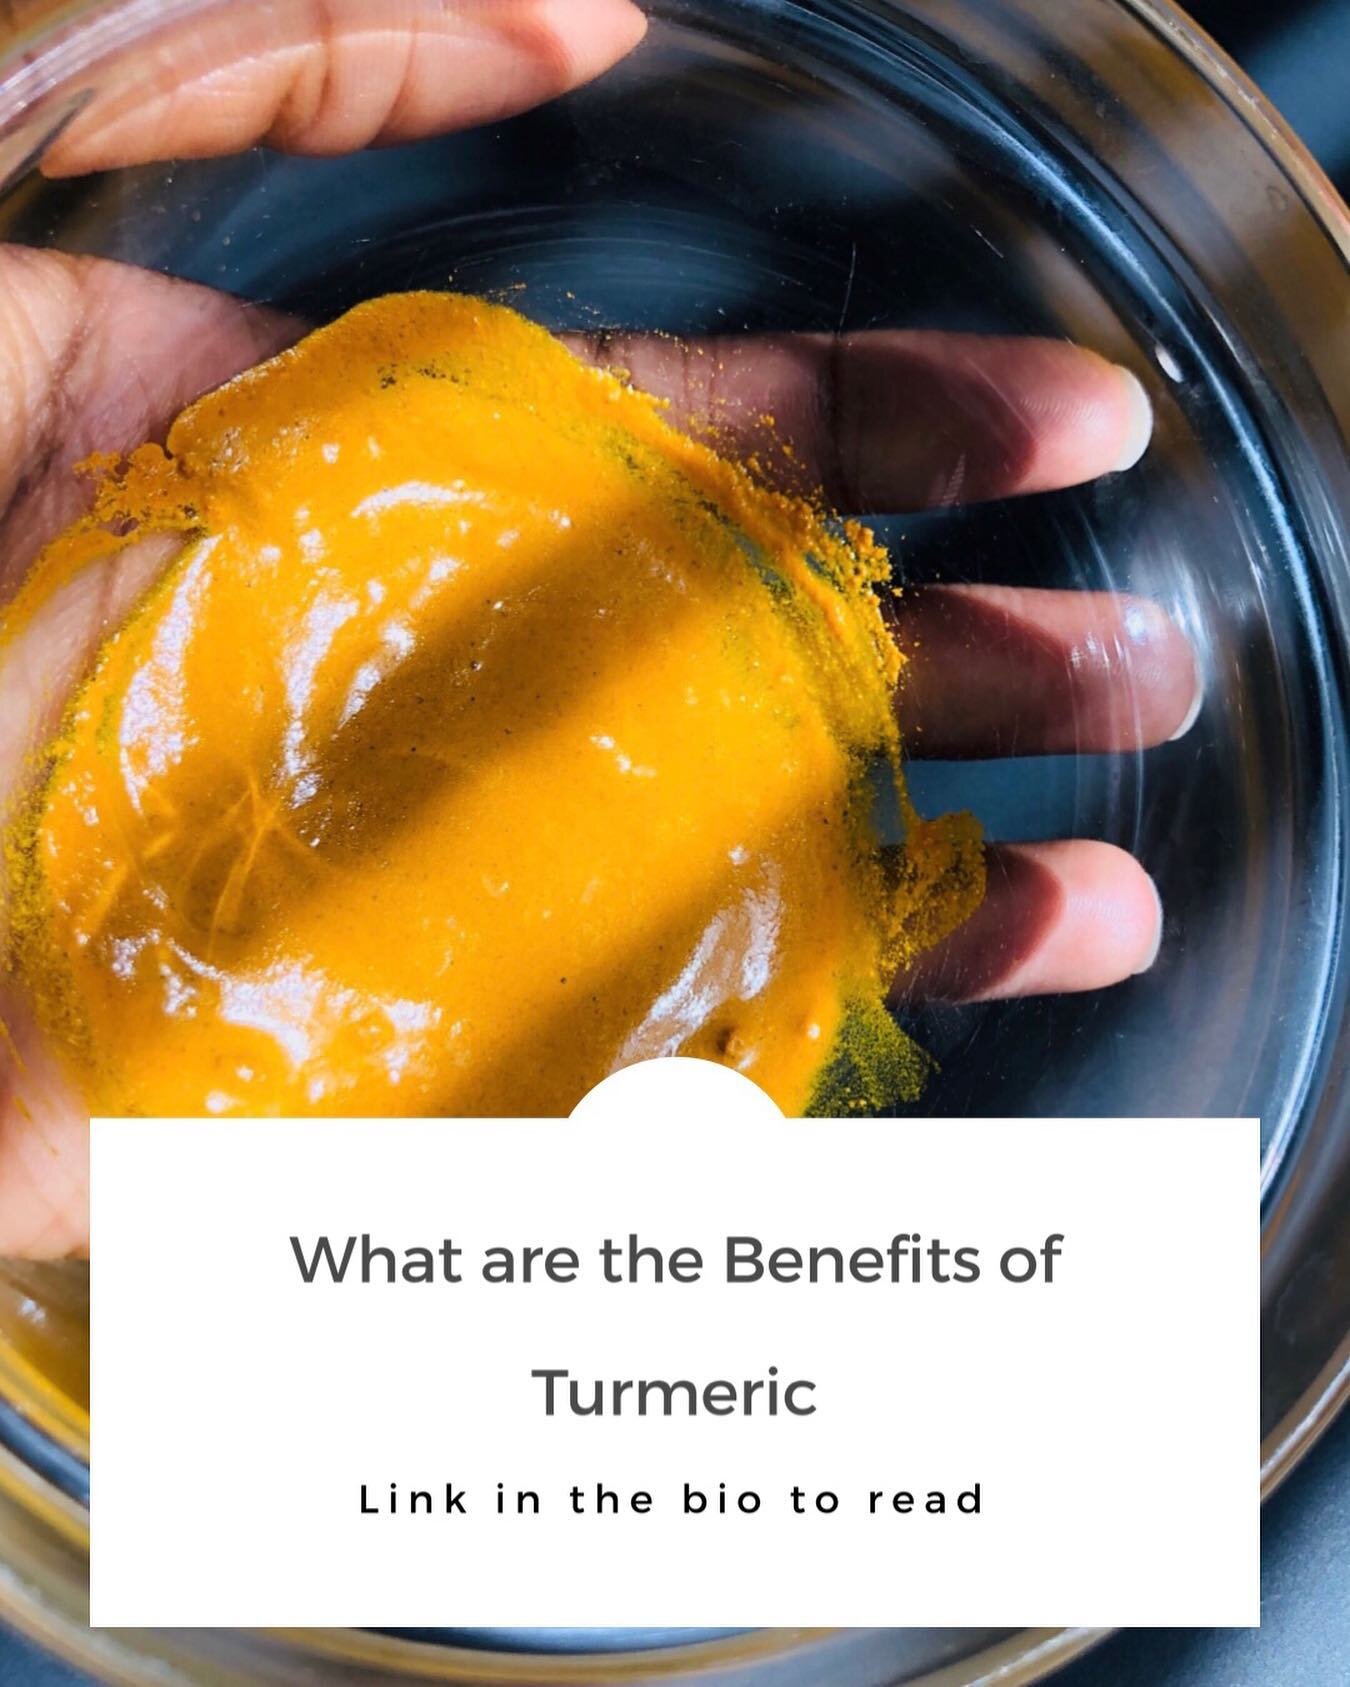 Don&rsquo;t forget to check out our blog post on the benefits of turmeric for the skin 💫

#cleanbeauty #naturalskincare #turmericmask #turmericbenefits #skinbeauty